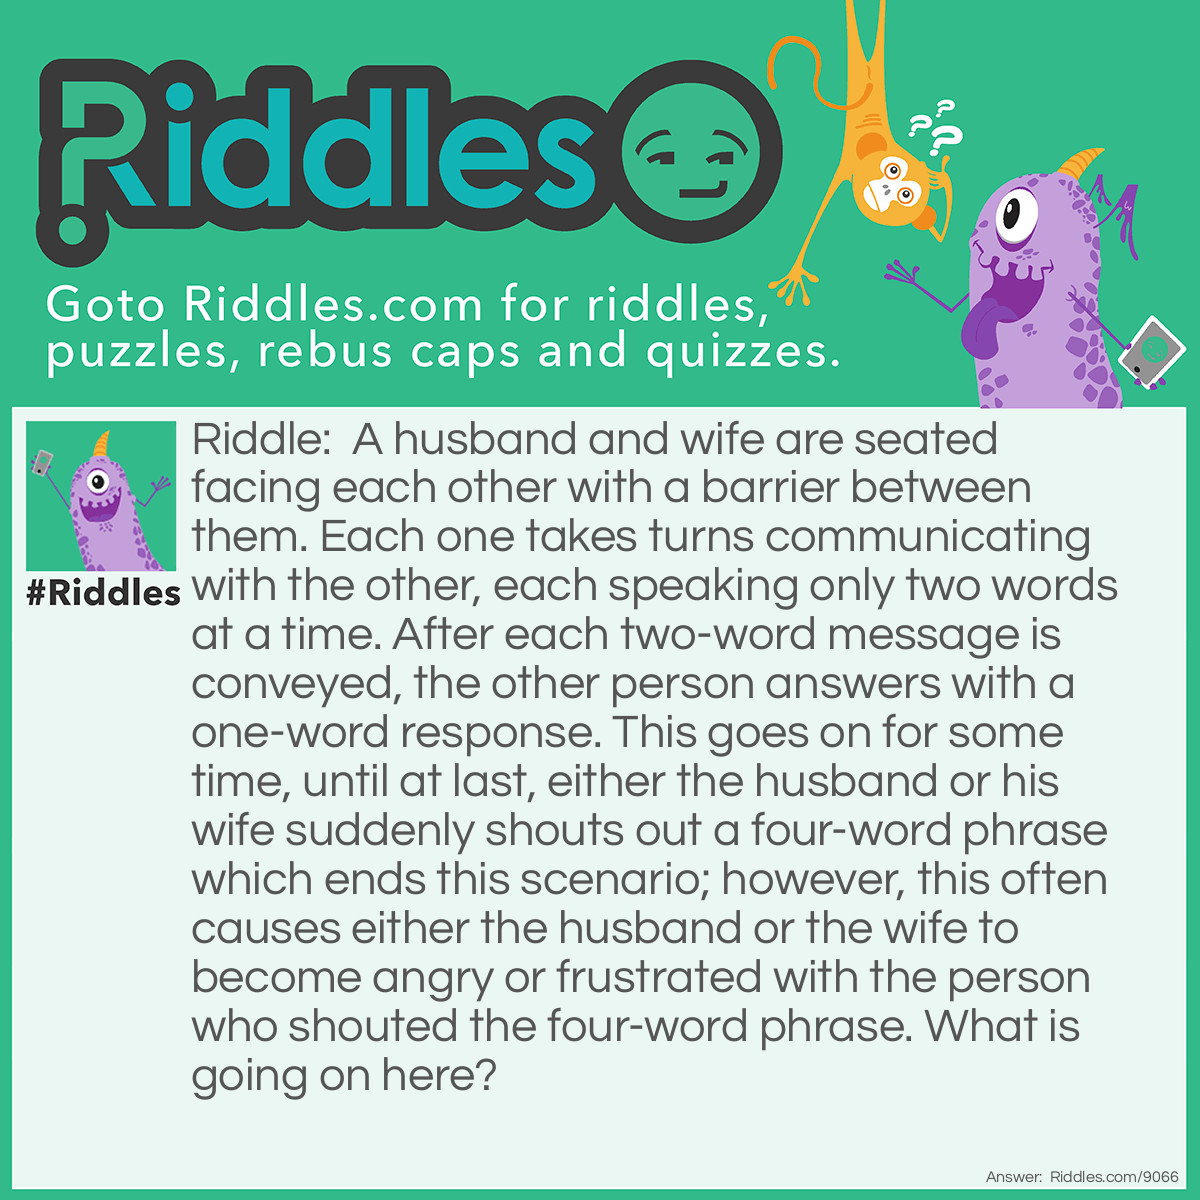 Riddle: A husband and wife are seated facing each other with a barrier between them. Each one takes turns communicating with the other, each speaking only two words at a time. After each two-word message is conveyed, the other person answers with a one-word response. This goes on for some time, until at last, either the husband or his wife suddenly shouts out a four-word phrase which ends this scenario; however, this often causes either the husband or the wife to become angry or frustrated with the person who shouted the four-word phrase. What is going on here? Answer: The husband and wife are playing the old game of BATTLESHIP. The two-word communications consist of a letter and a number for the coordinates of where the ships are hidden, and the one-word responses are either, "Hit" or "Miss". The final four word phrase which ends the game is, "You Sank My Battleship!"